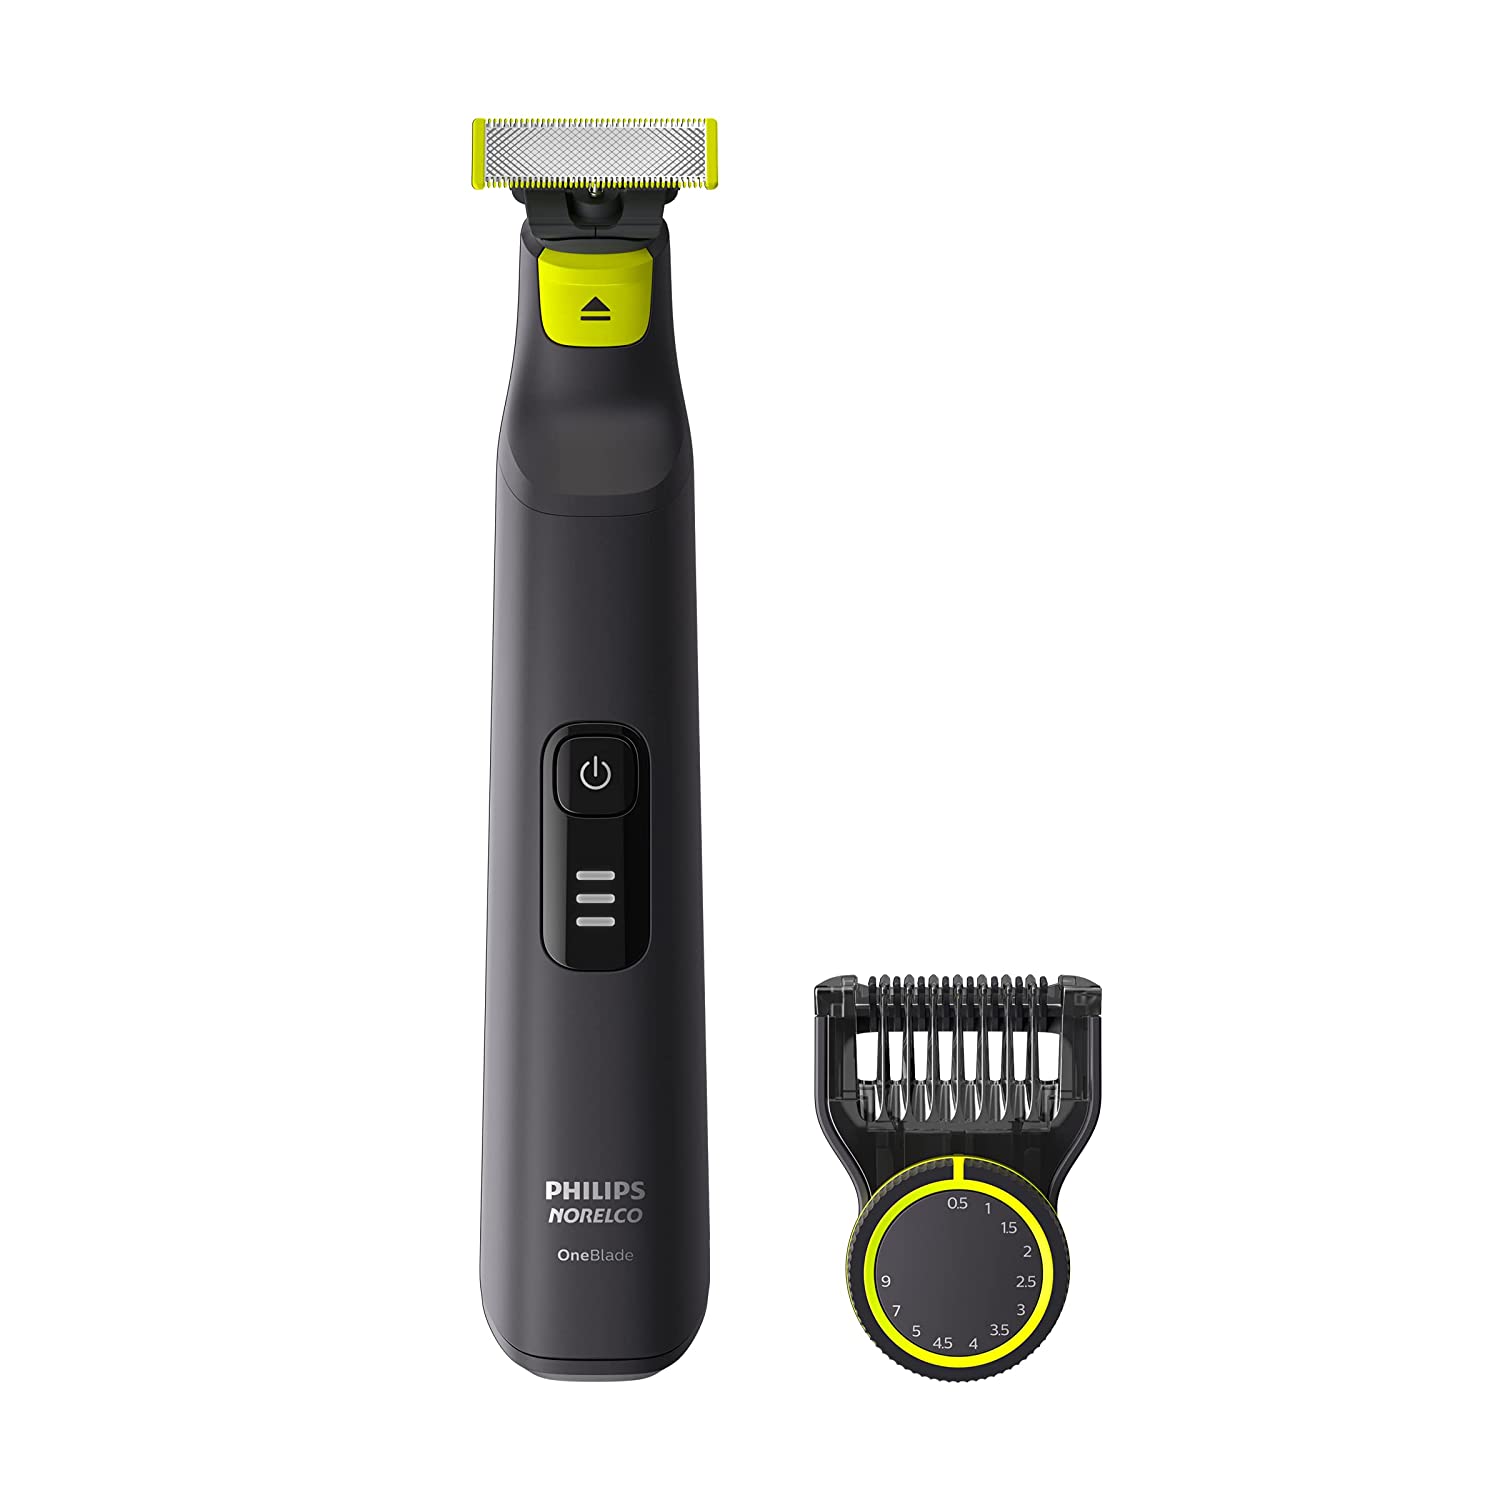 Philips Norelco OneBlade Pro Hybrid Electric Trimmer and Shaver, Black, 2 Piece, QP6530:70 best norelco shaver for black skin